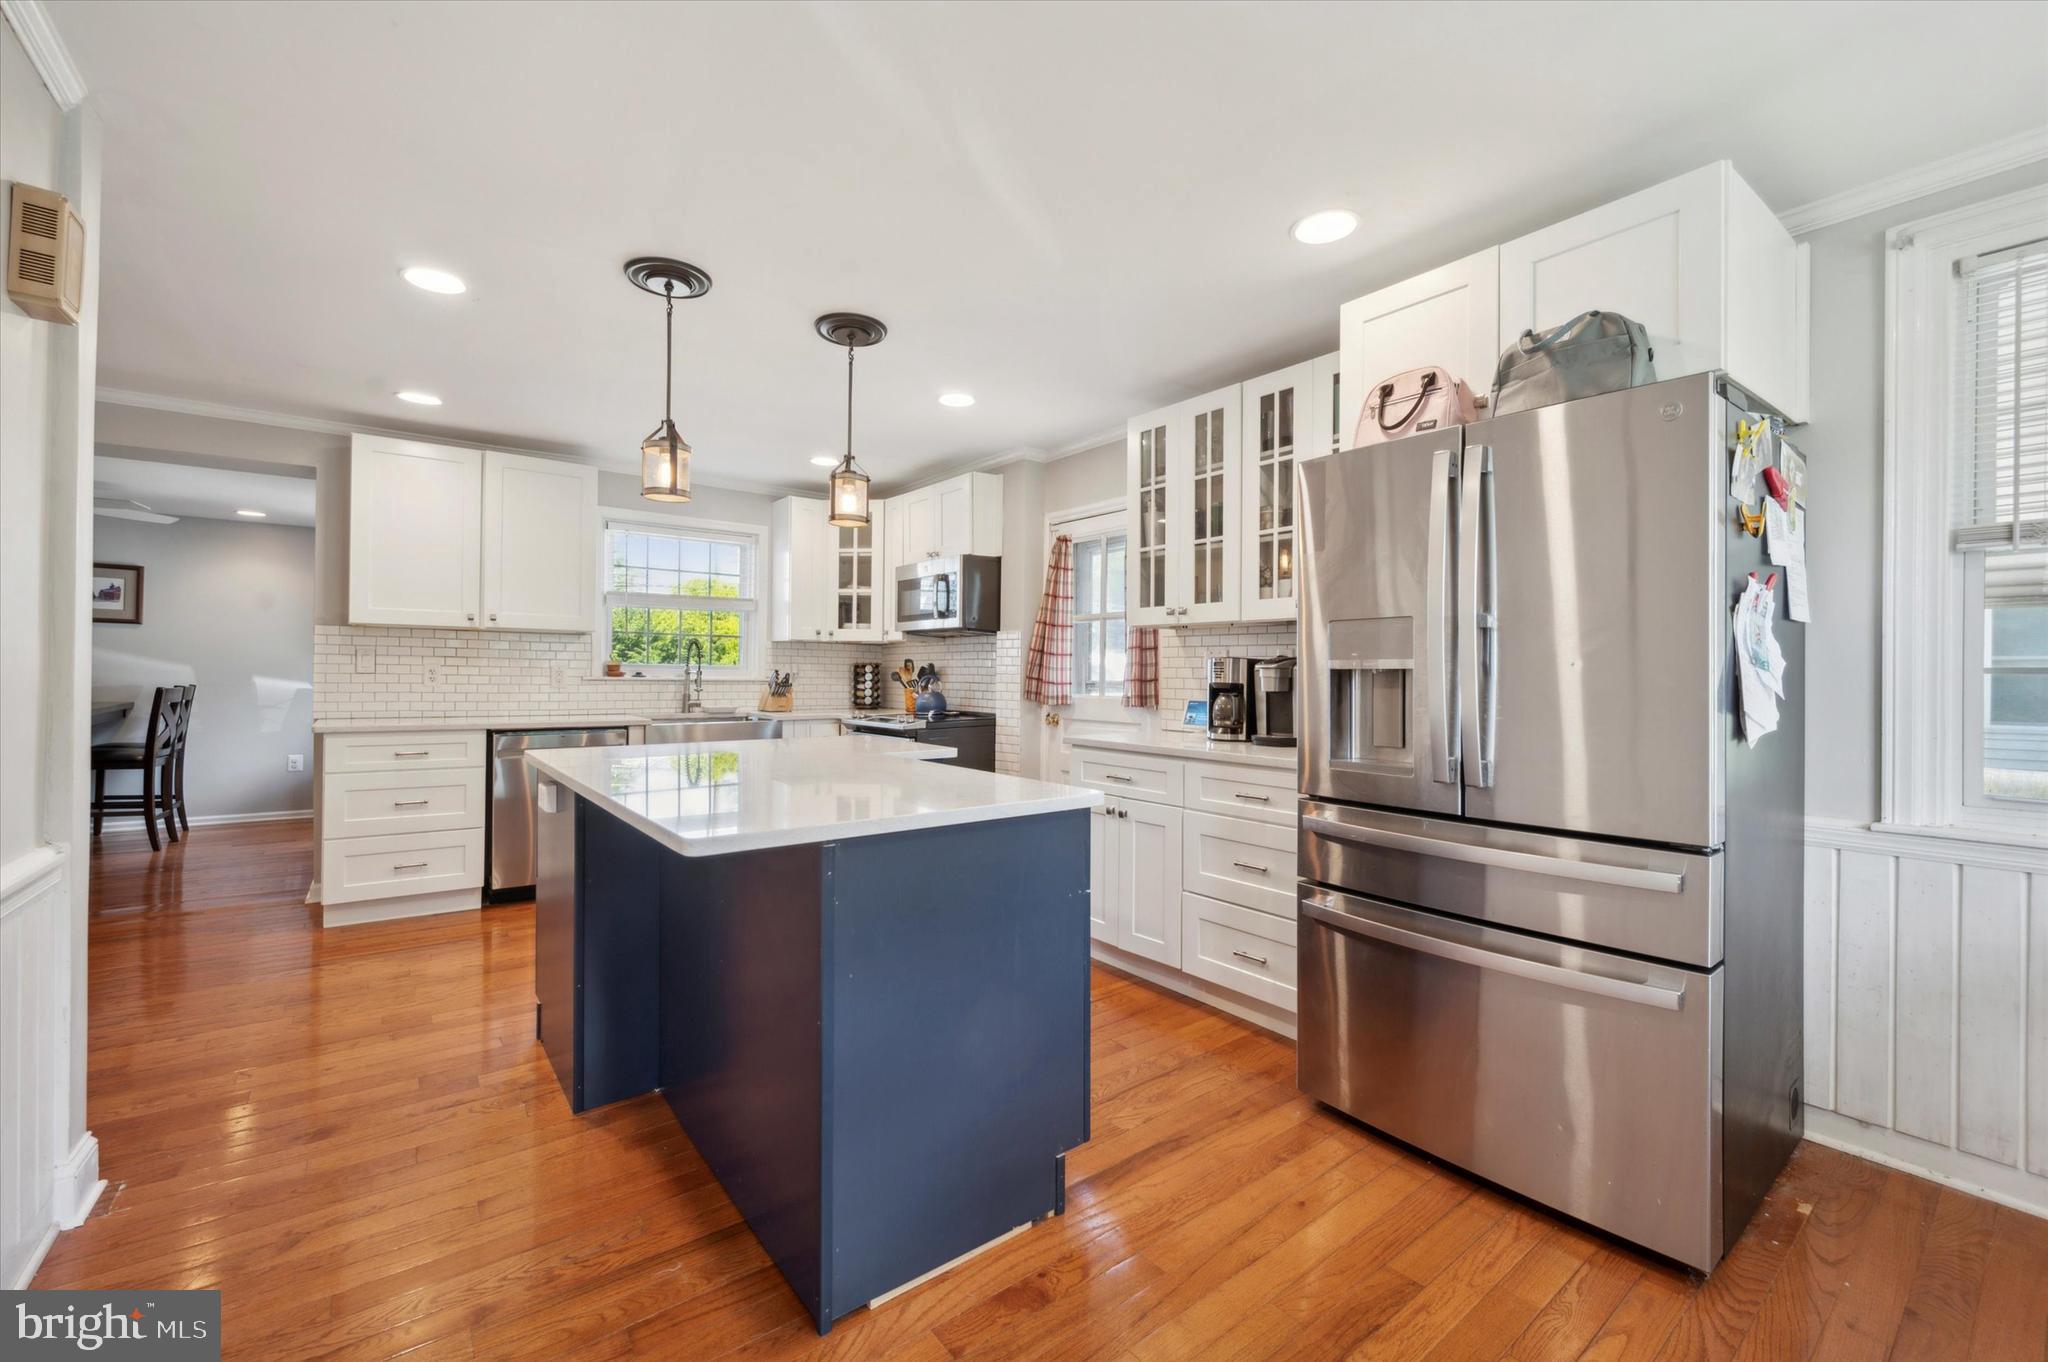 a kitchen with kitchen island wooden floors stainless steel appliances and cabinets